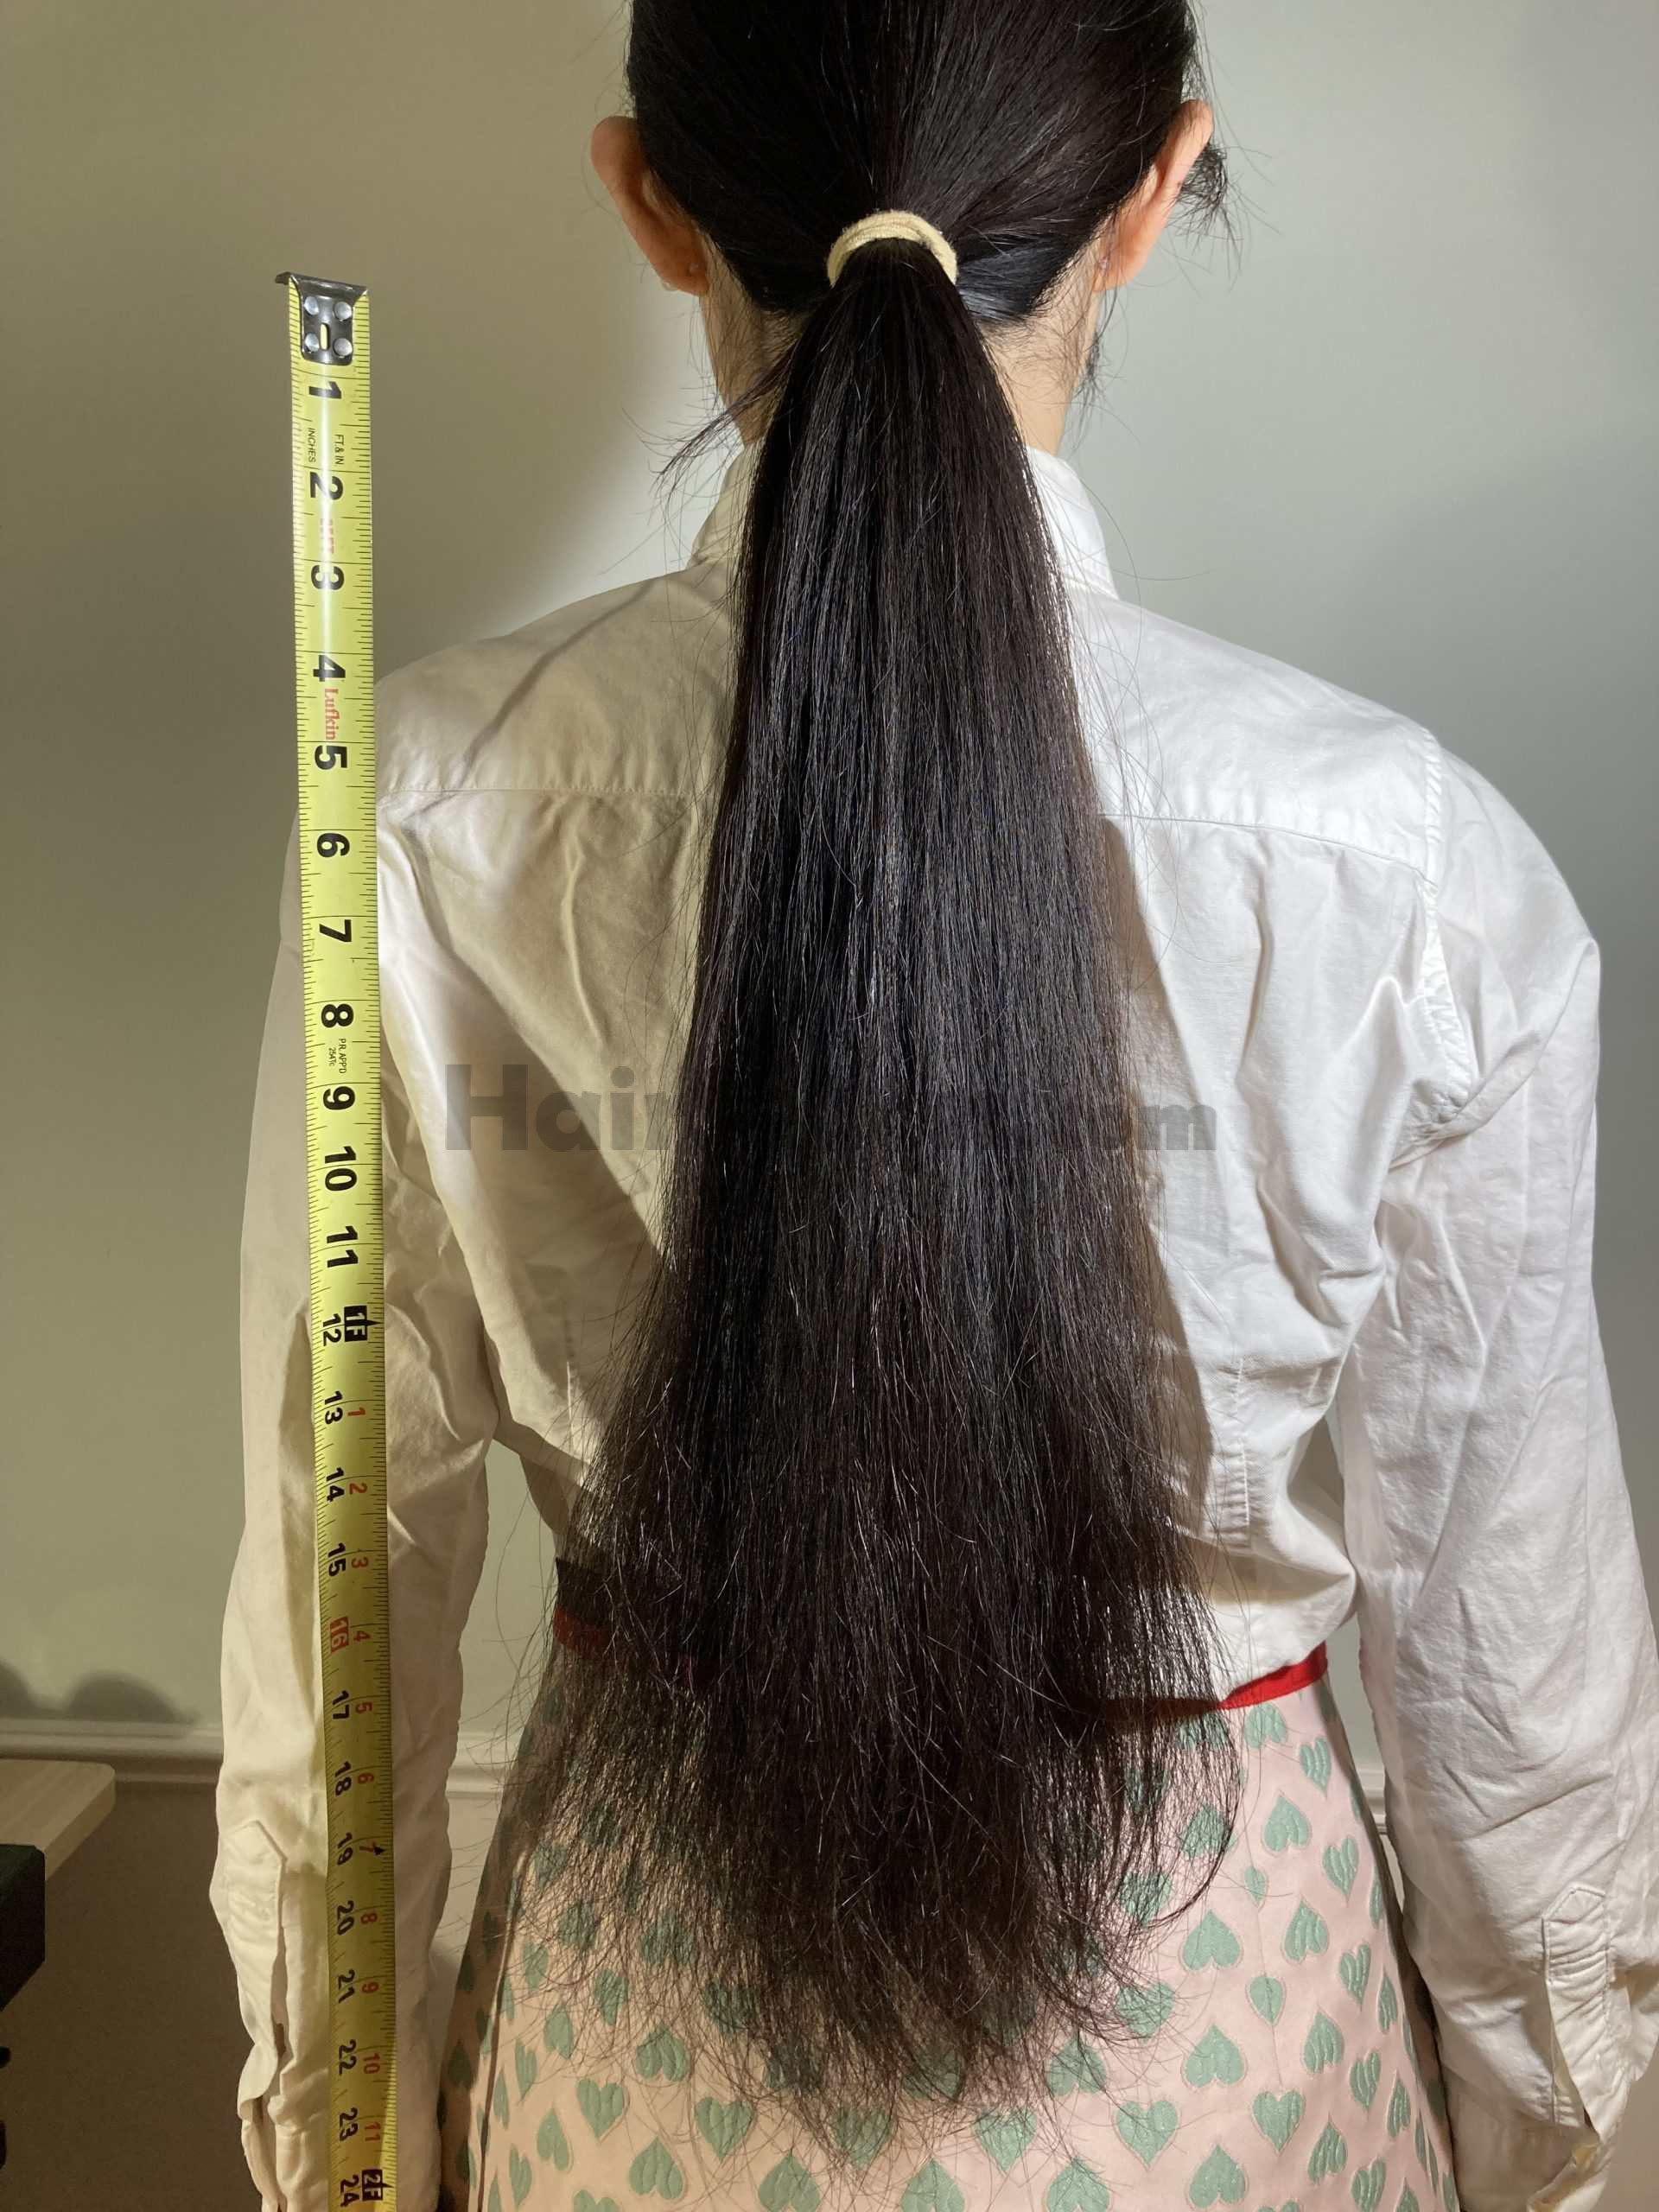 23 inches in length. The ends are two feet uneven.